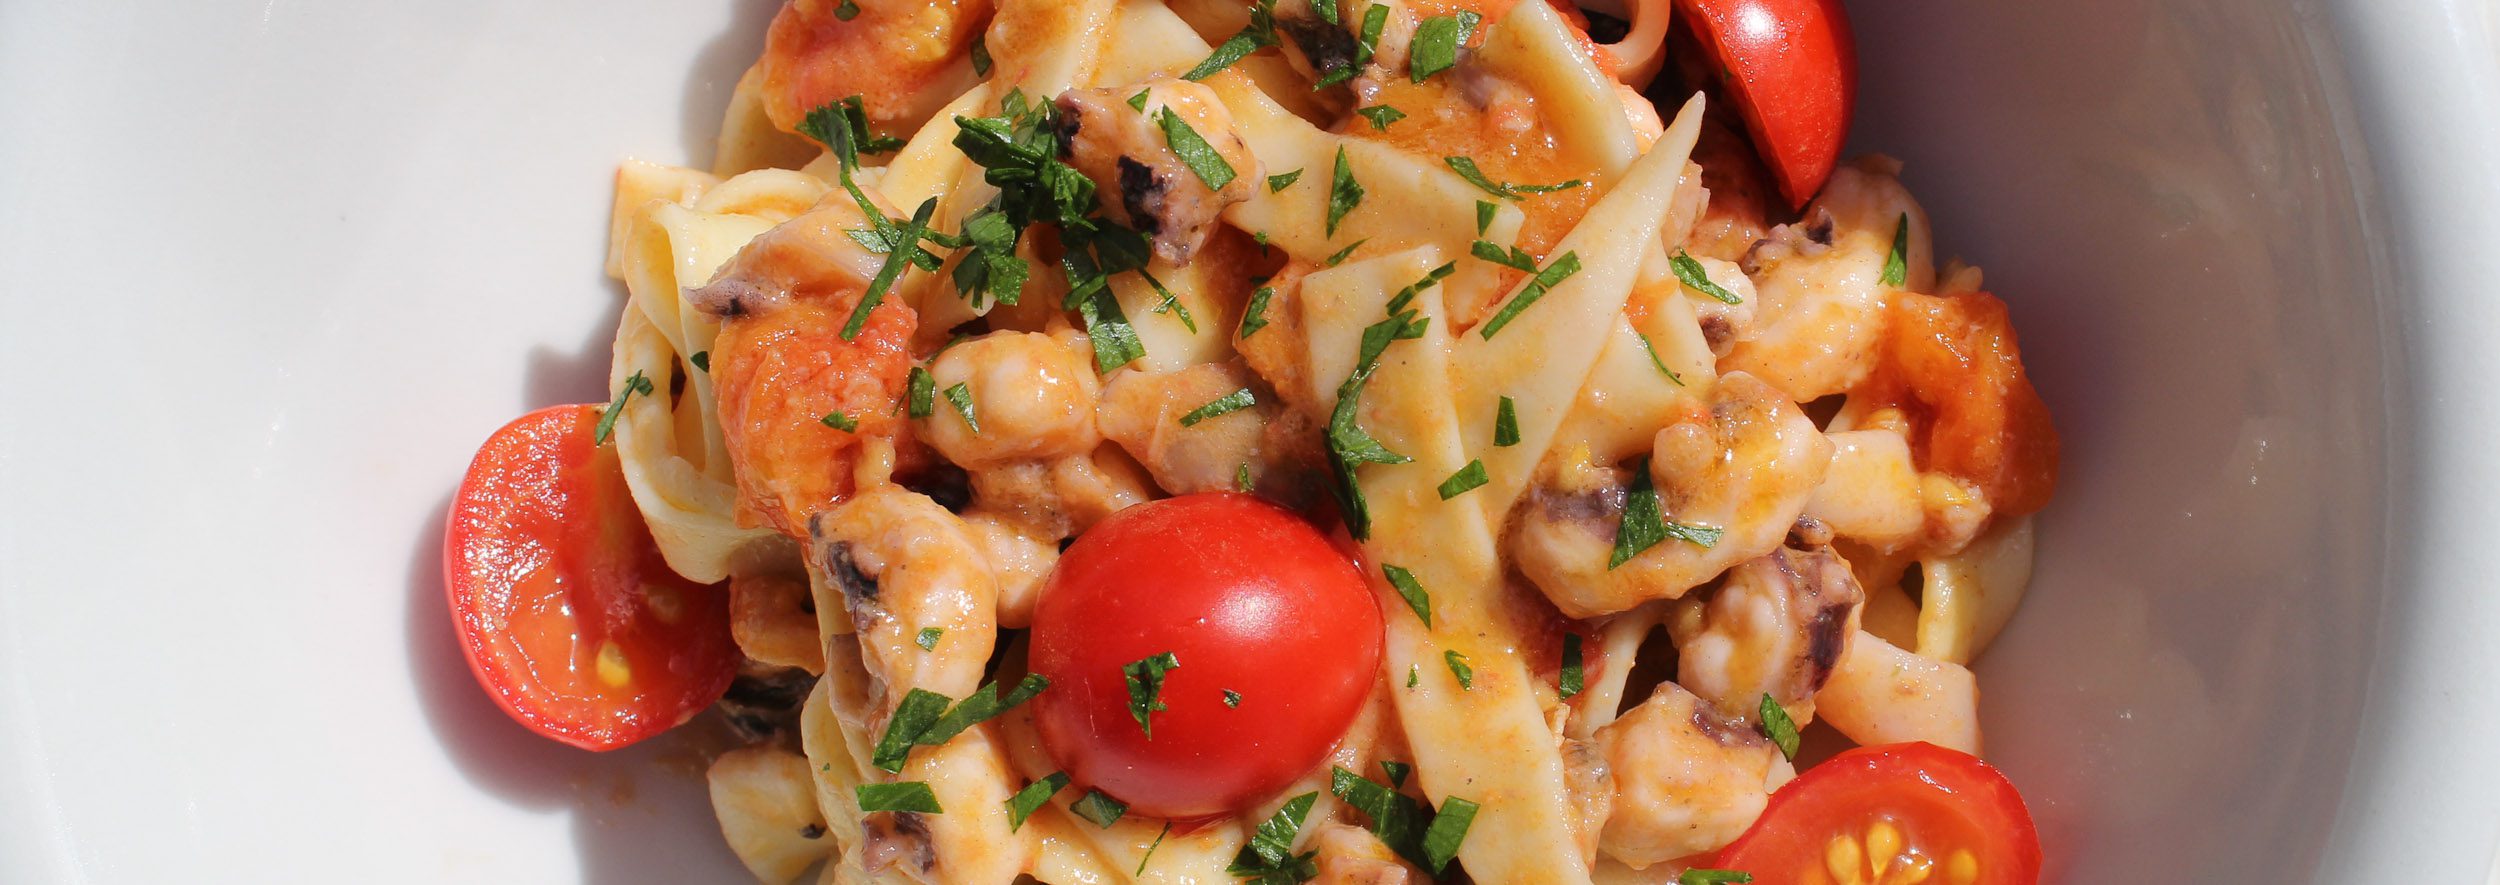 Pasta with seafood - Italian Notes